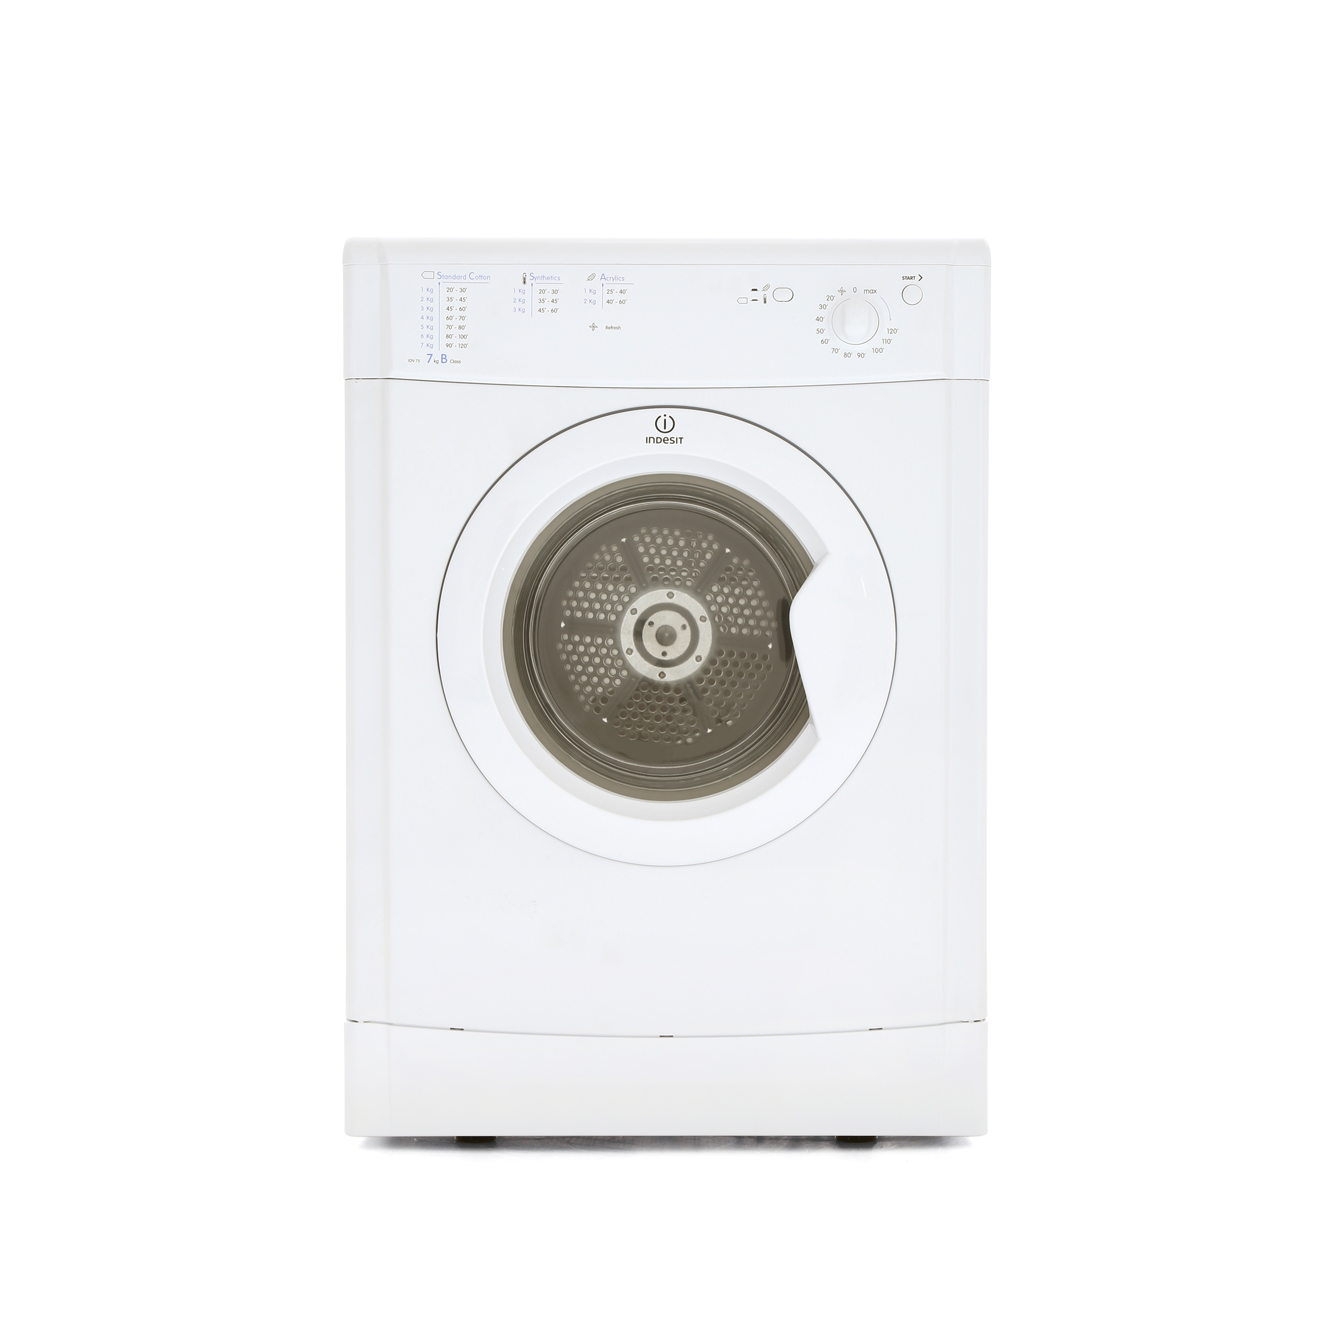 Indesit IDV75 Ecotime Vented Tumble Dryer, 7kg Load, B Energy Rating, White